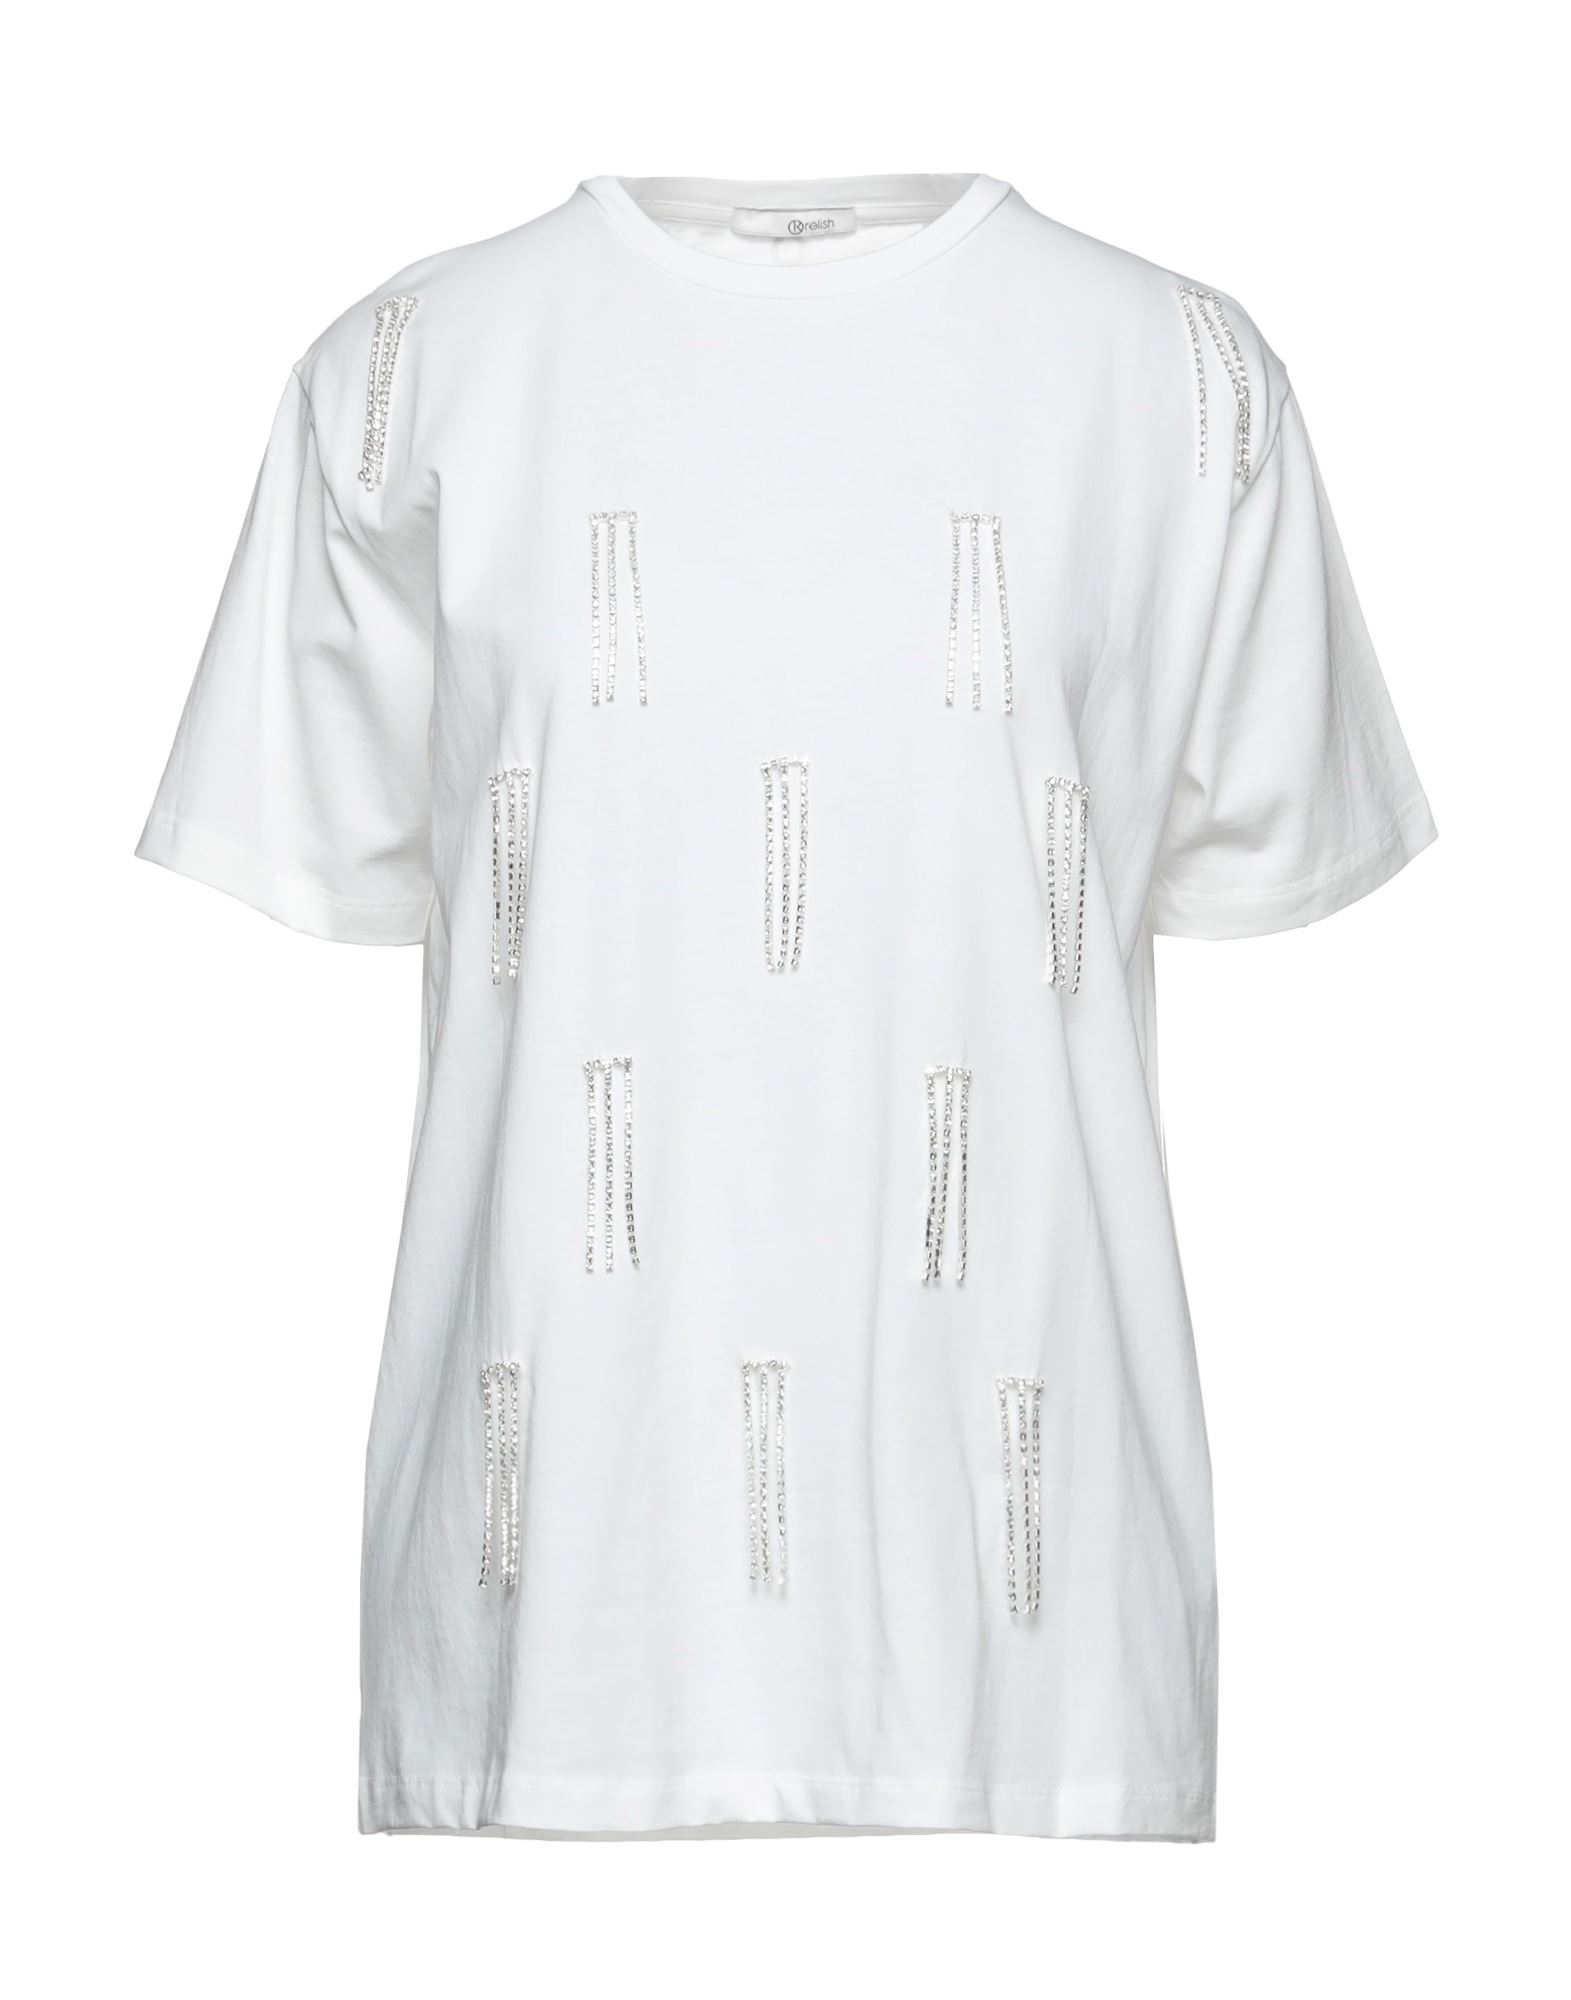 Relish T-shirts In White